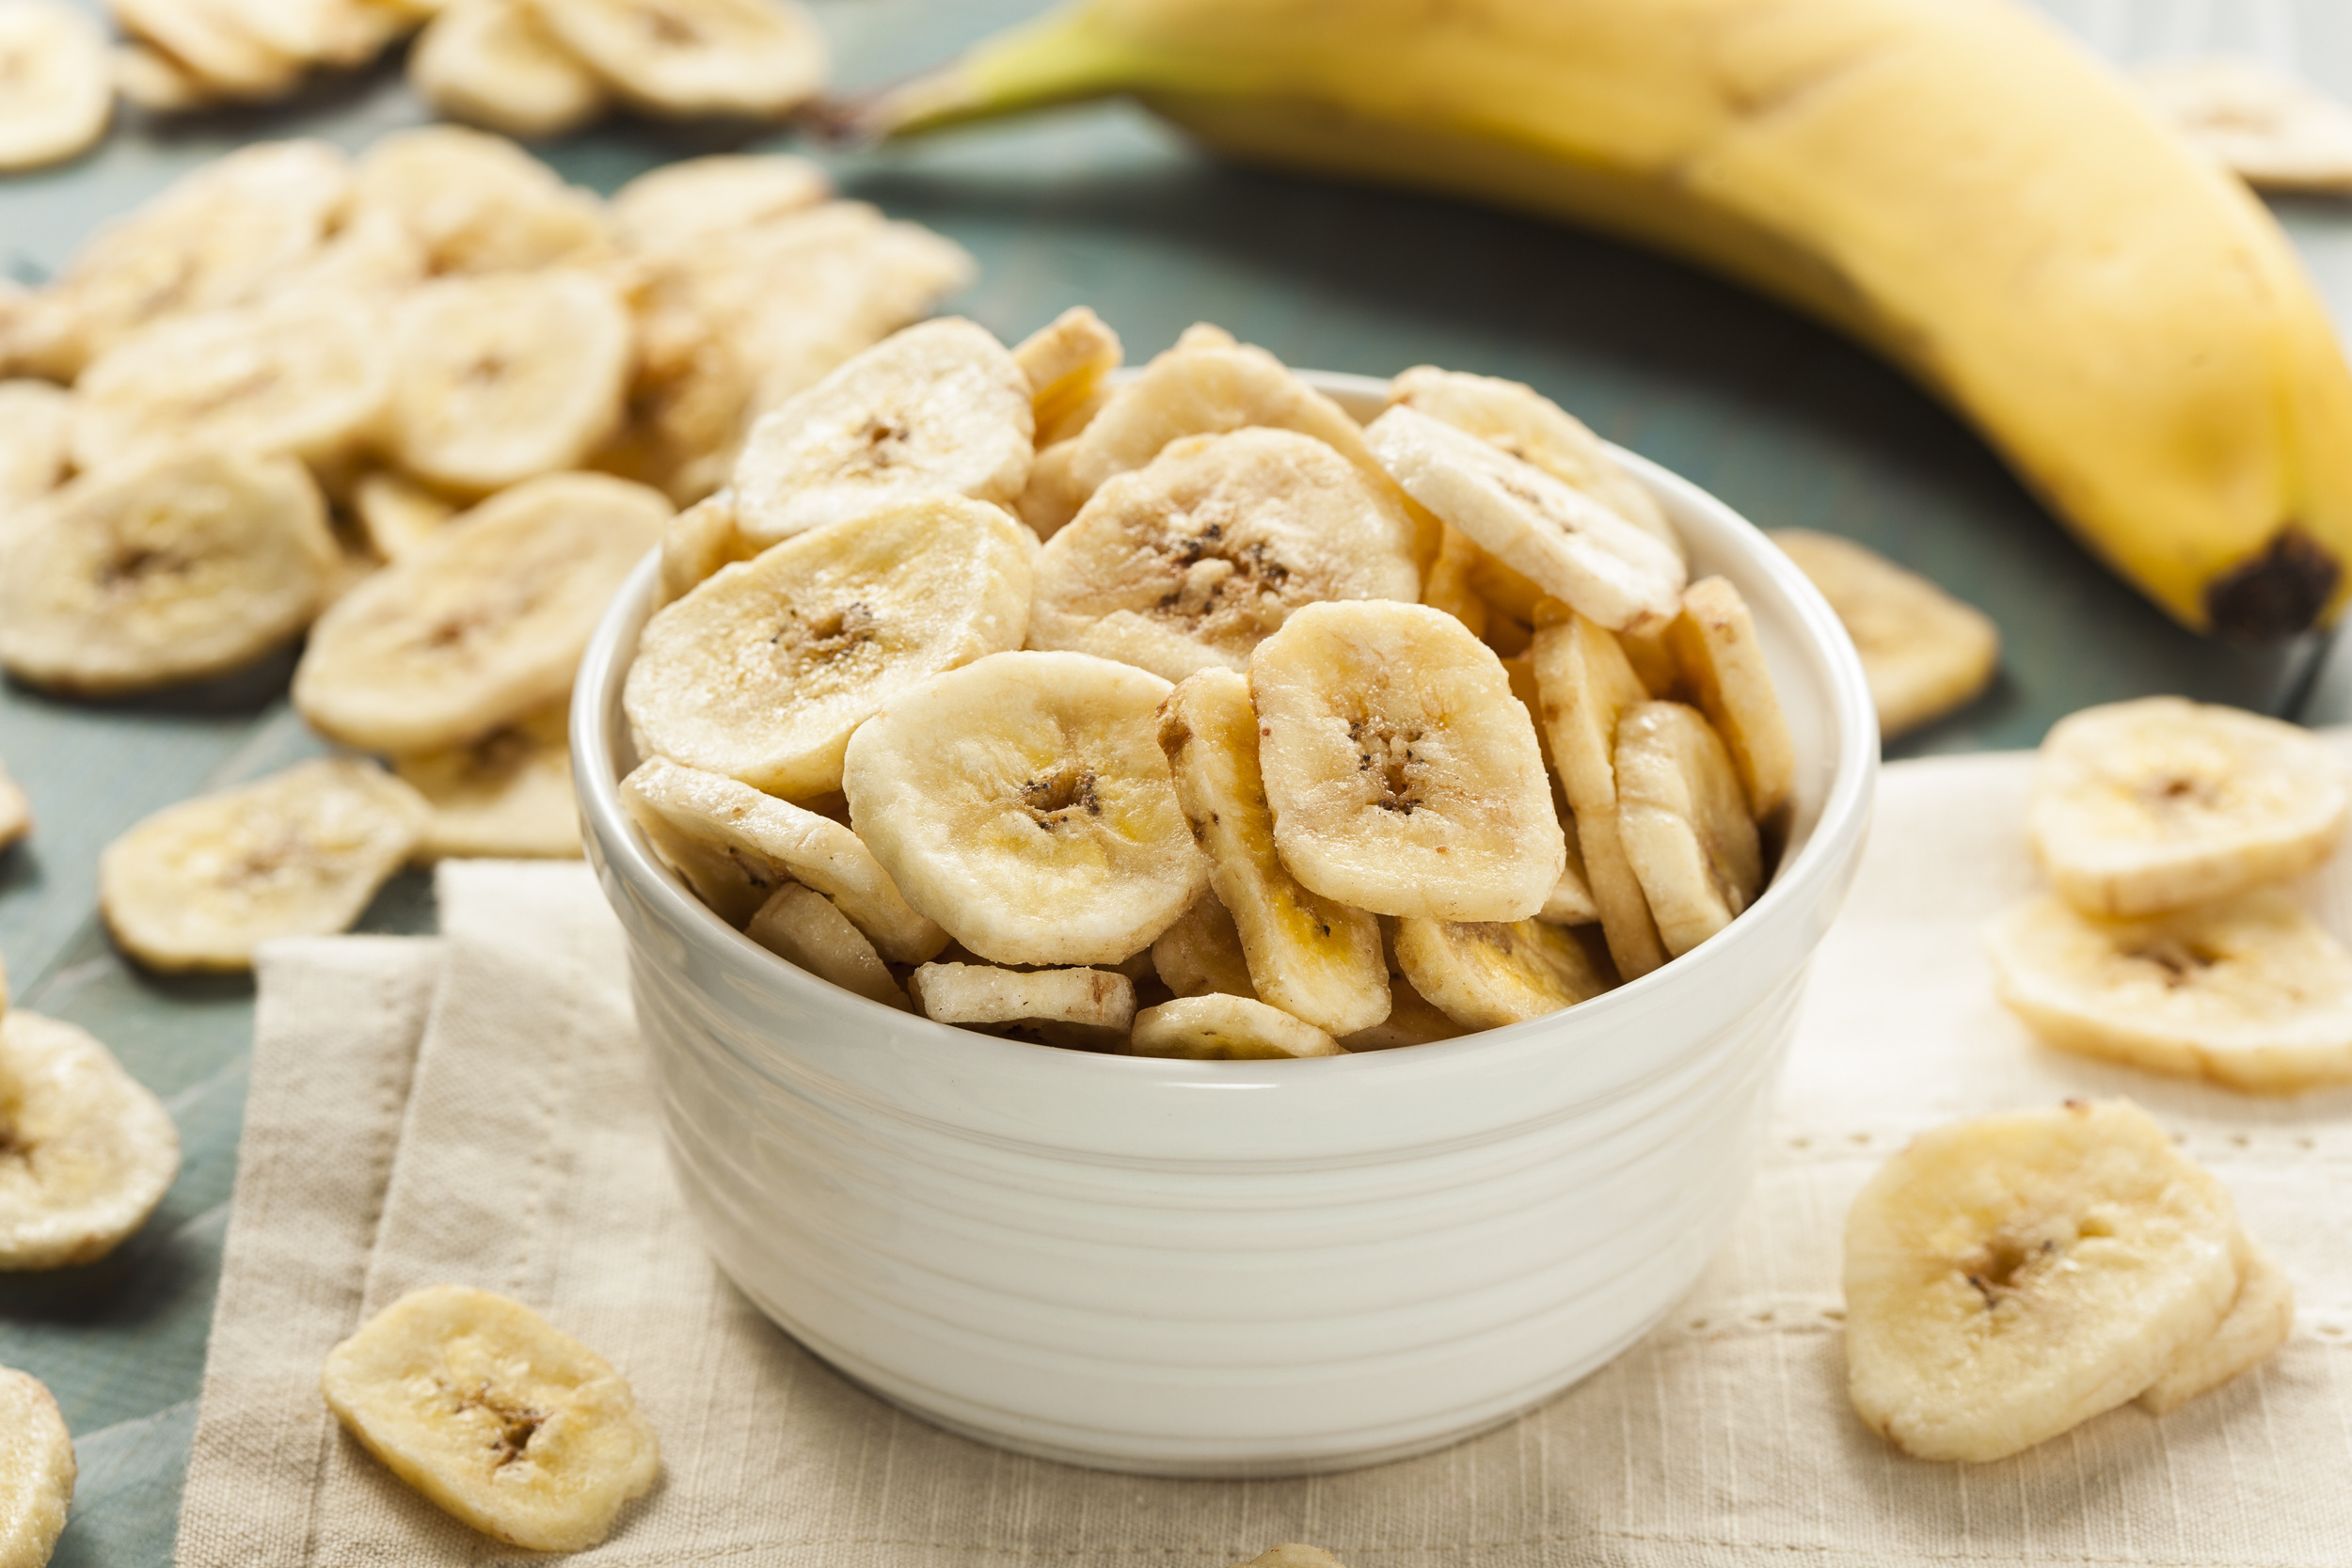 <p>We like banana chips by themselves—as well as plain ol’ bananas (or in a smoothie!)—so we enjoy them in our trail mix, too. Bananas are rich in fiber and potassium, but store-bought banana chips can also be fried in oil or loaded with added sugar. Keep the ingredients in check by making them at home, and skip the oil by baking them instead!</p><p><a href='https://www.msn.com/en-us/community/channel/vid-cj9pqbr0vn9in2b6ddcd8sfgpfq6x6utp44fssrv6mc2gtybw0us'>Follow us on MSN to see more of our exclusive lifestyle content.</a></p>